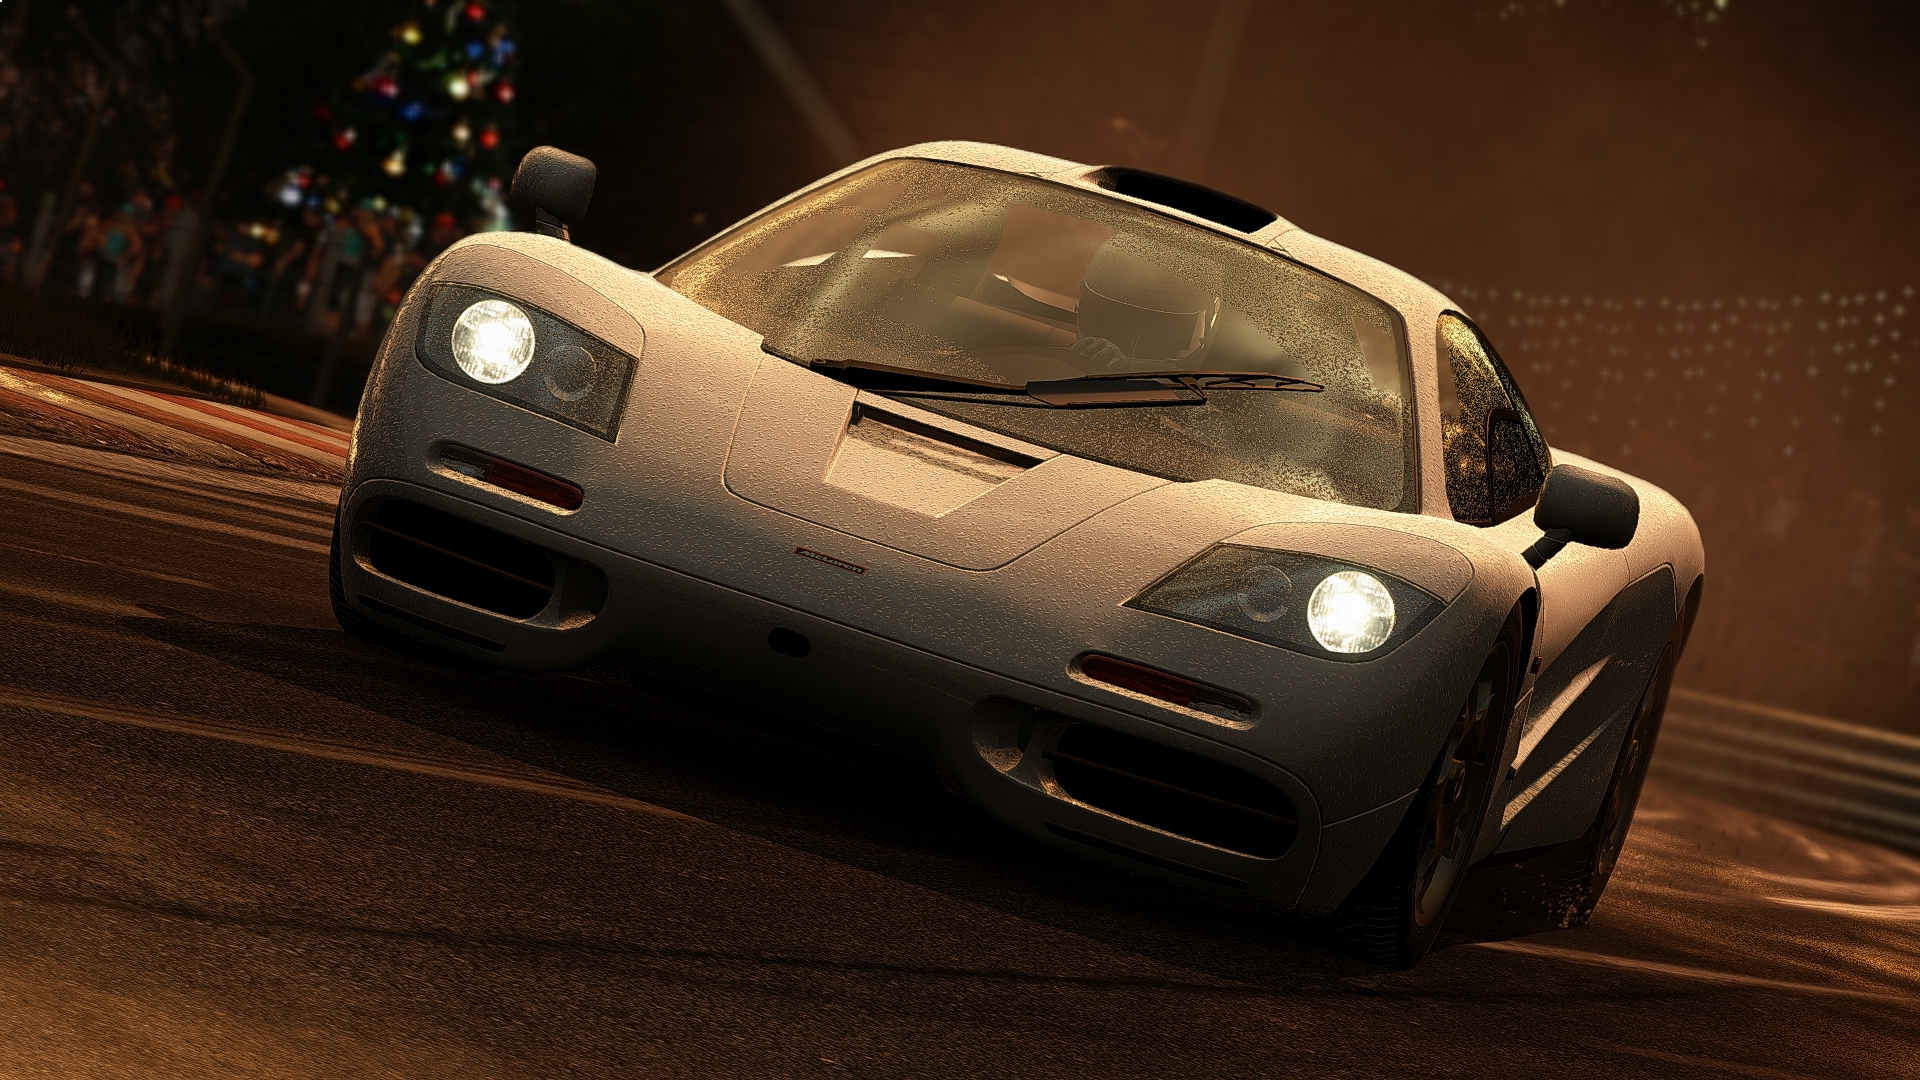 Yup, This Is Still The World’s Most Attractive Racing Game